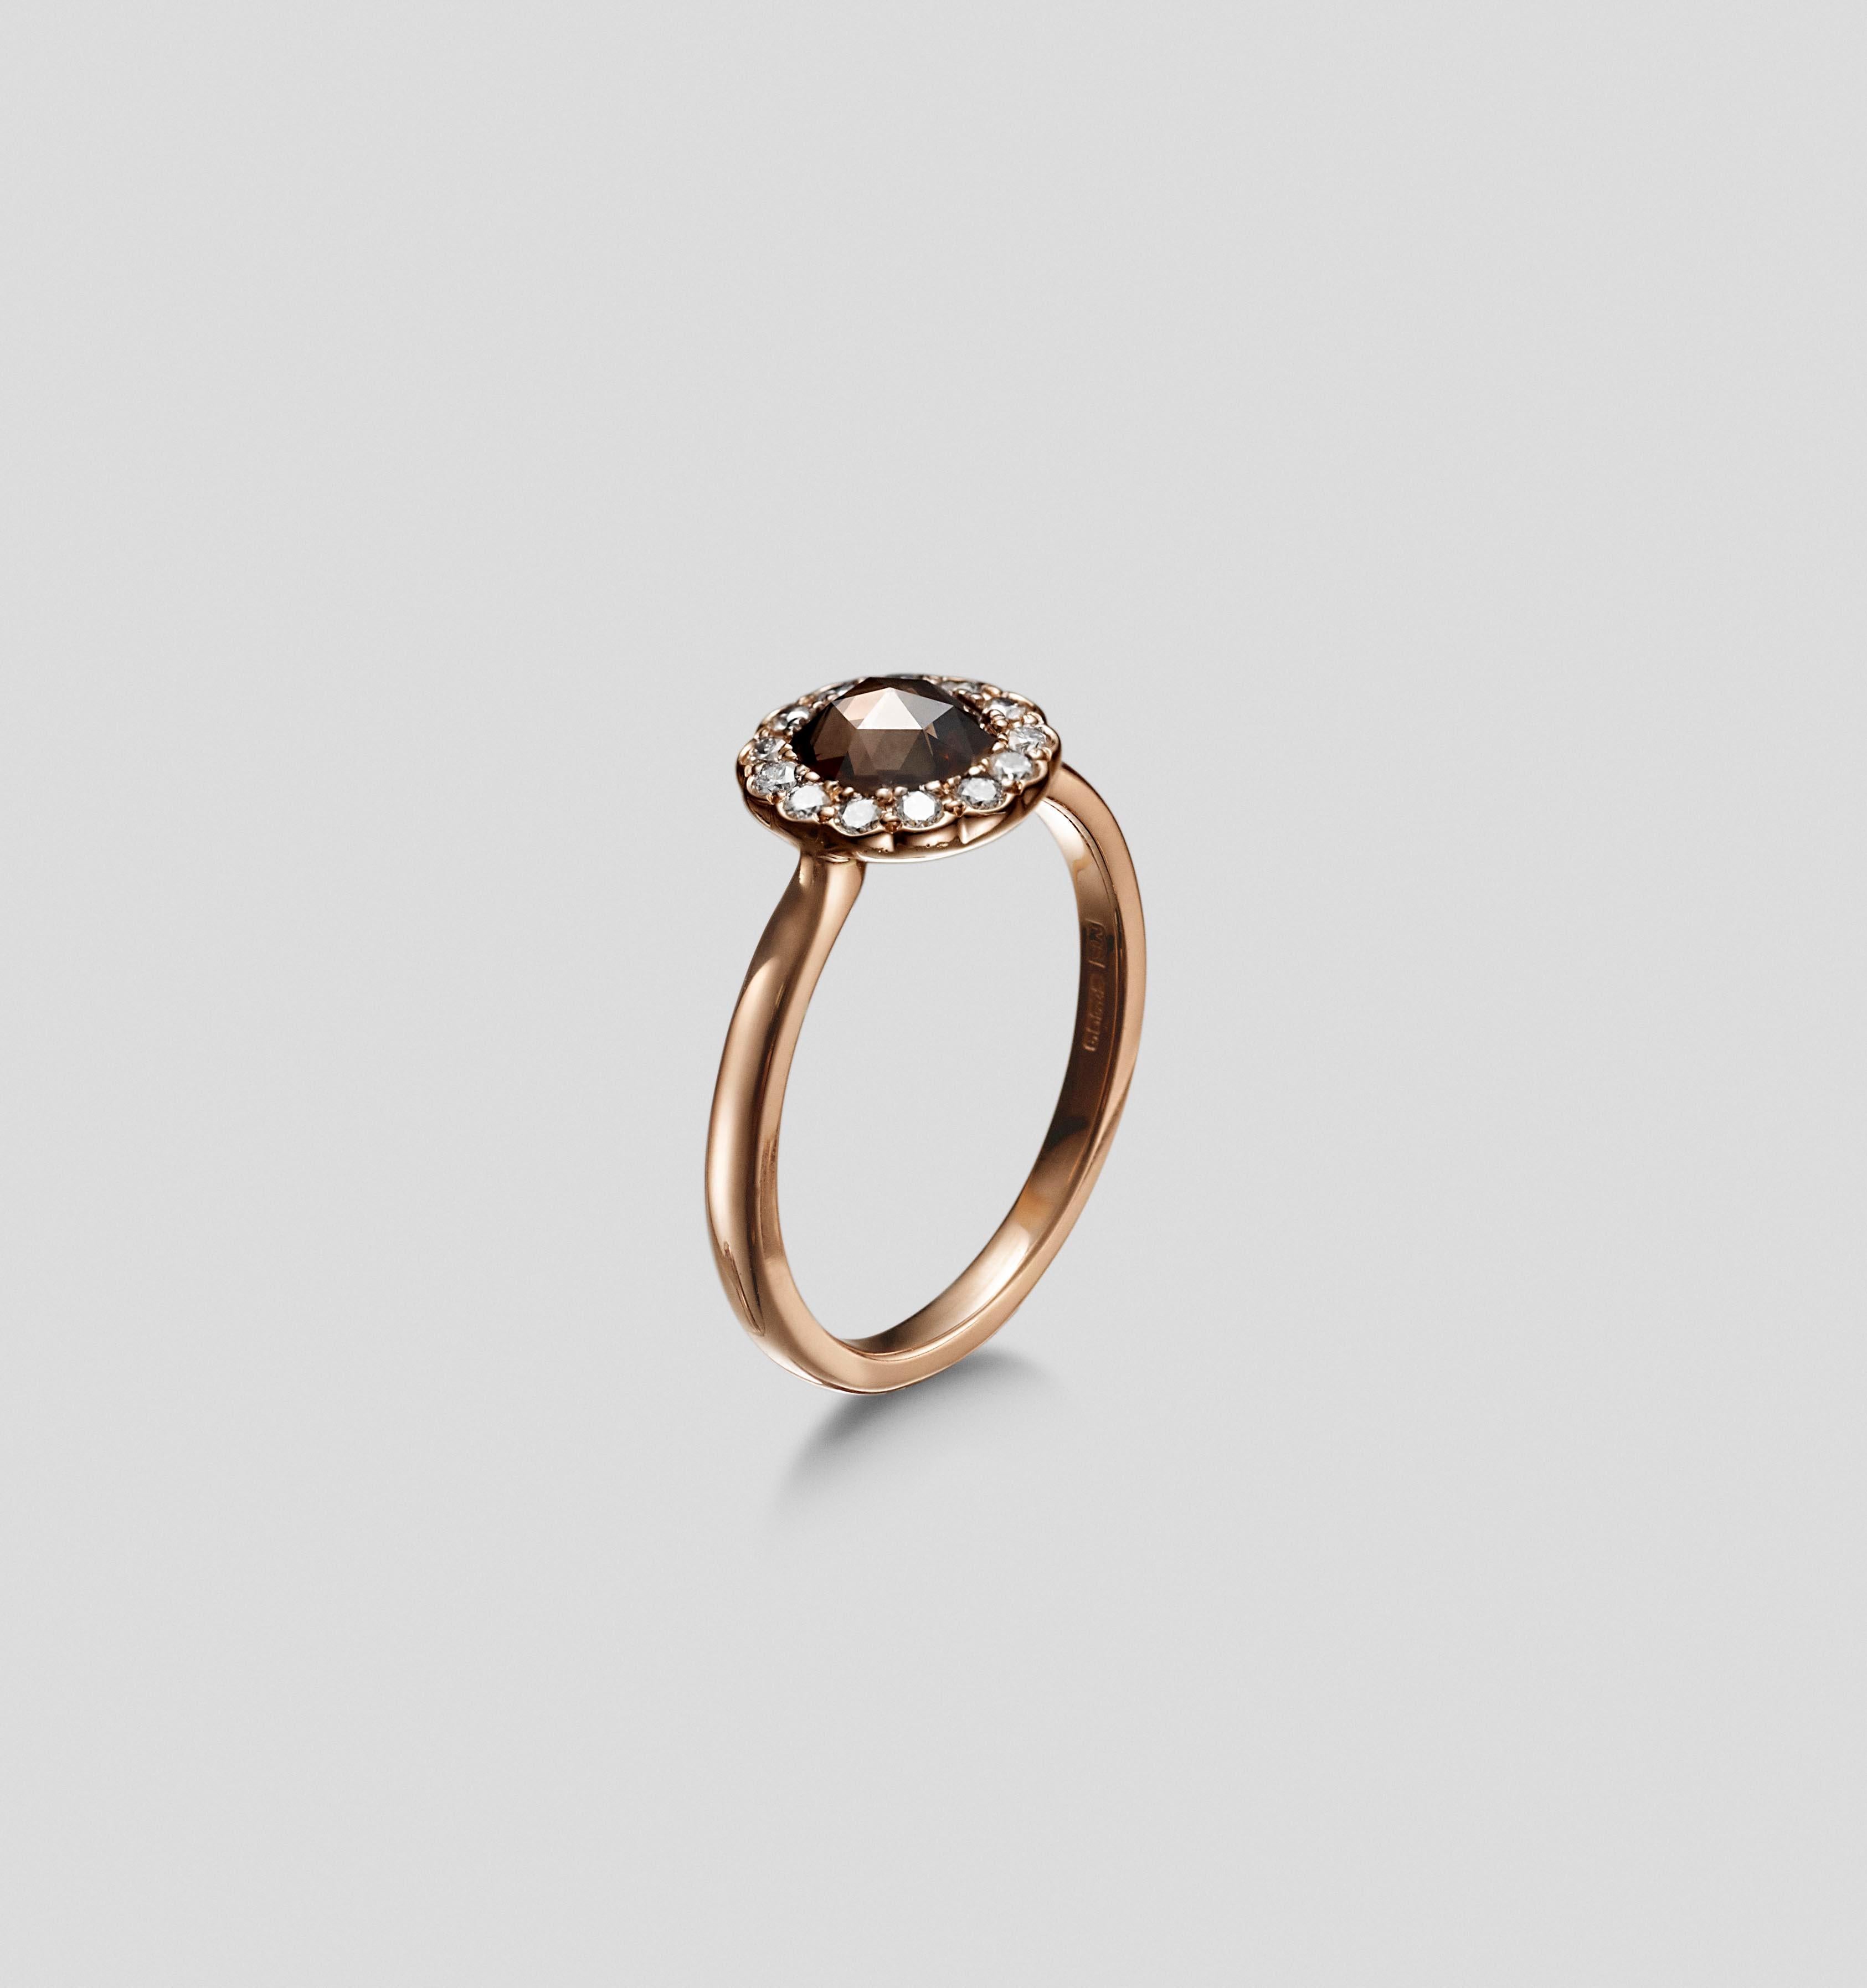 This gorgeous rose gold ring is part of the Zahr collection.  It blends colour and shapes.  With a diamond shaped basket underneath, this ring has all the elements of a well made and designed piece of jewellery.  It can be worn as an engagement or